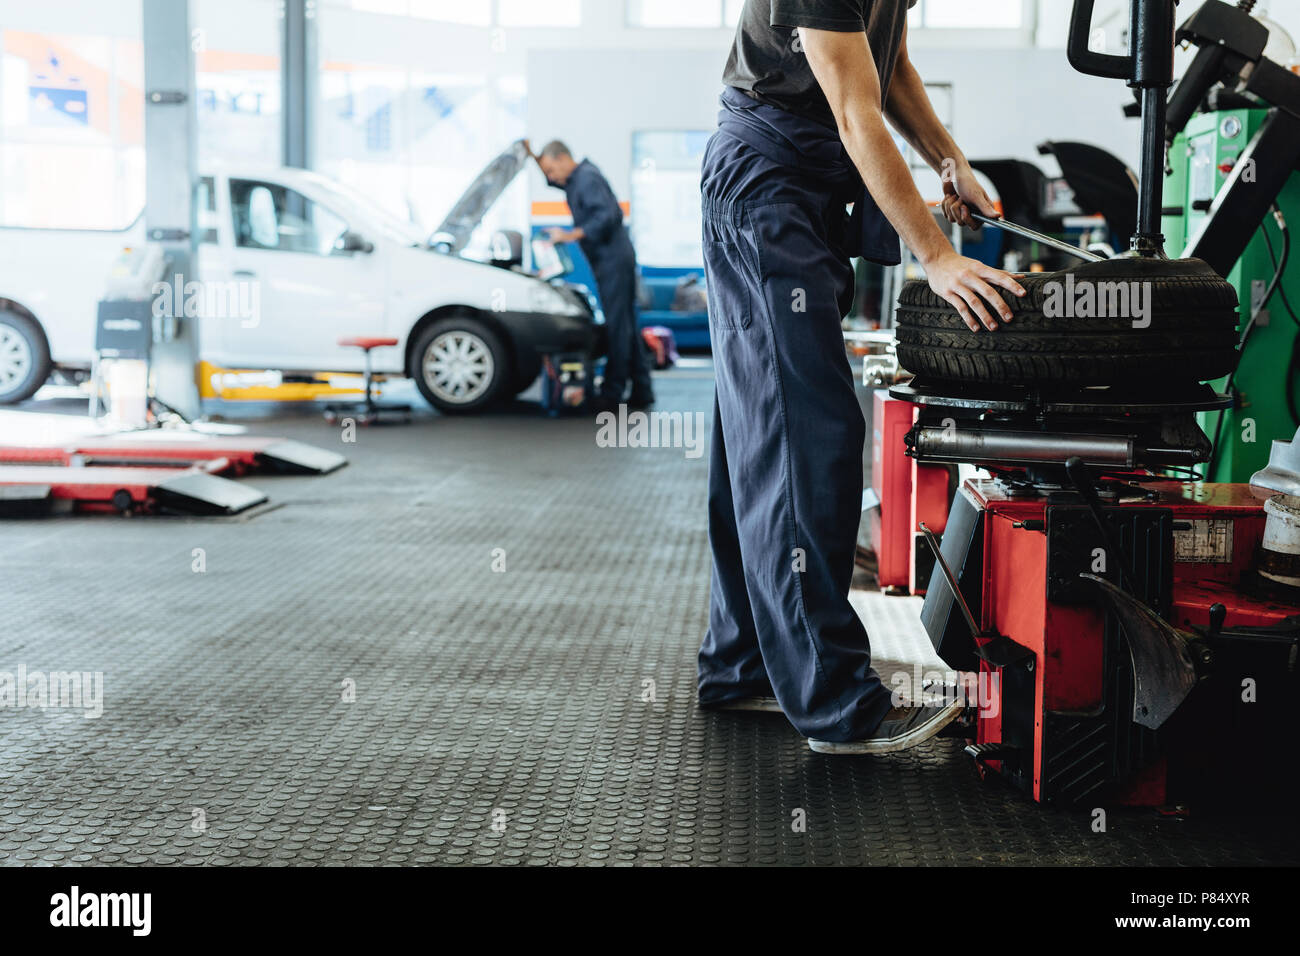 Car repair shop with mechanics working. Mechanic replacing tire of while on machine and other inspecting a vehicle. Stock Photo